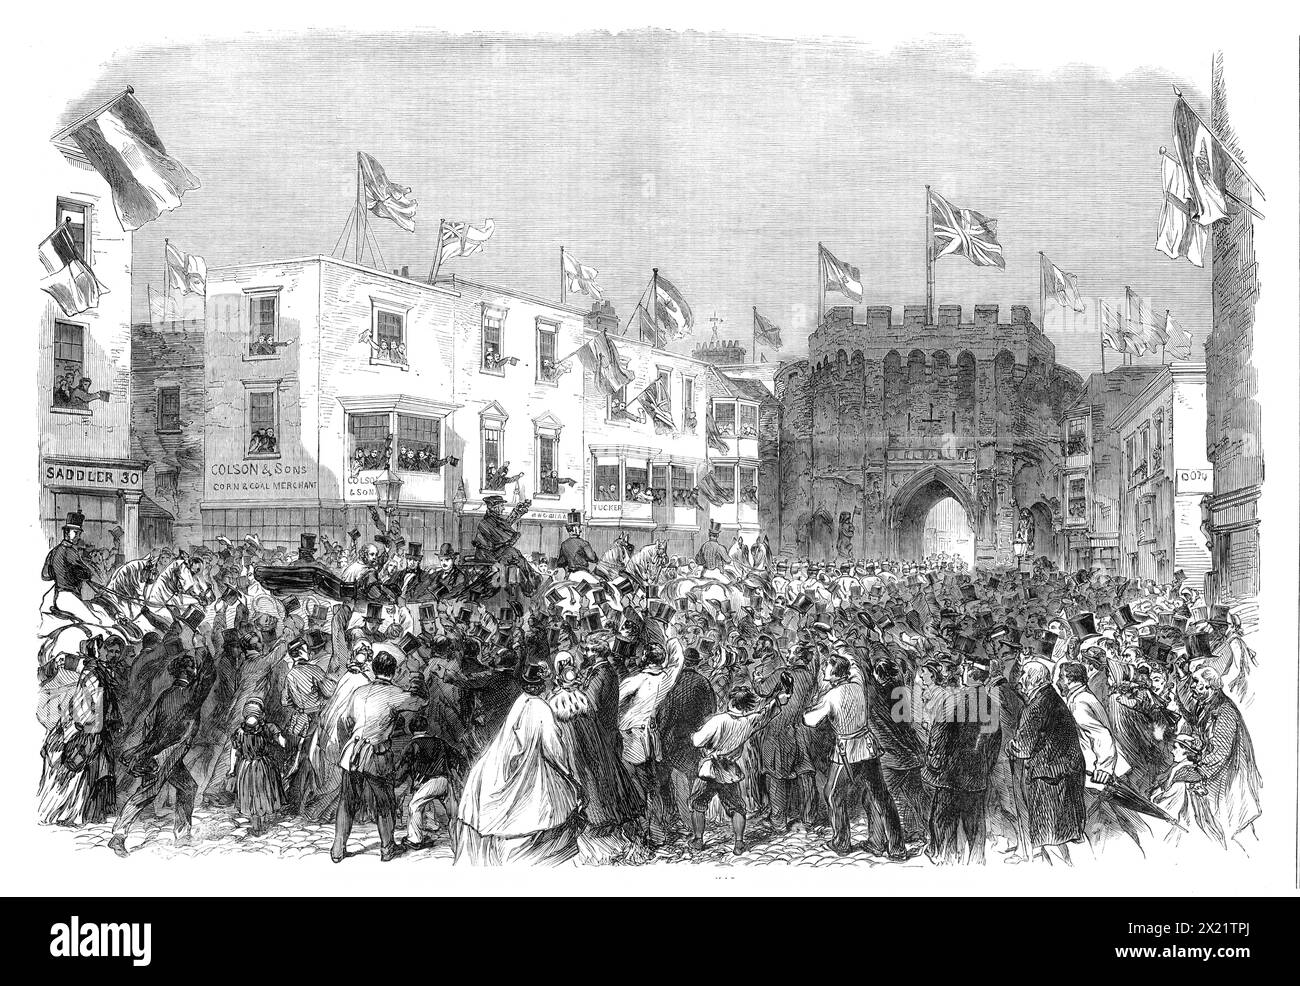 Garibaldi in England: arrival of Garibaldi at the townhall, Bargate, Southampton, 1864.  View of '...the picturesque old Bargate, in Southampton, at eleven o'clock on the Monday, with a carriage-and-four, containing Garibaldi, his two sons, Mr. Brinton, the Mayor of Southampton, and Mr. Seely, proceeding to the Townhall, amidst the acclamations of a crowd of people in the streets'. From &quot;Illustrated London News&quot;, 1864. Stock Photo